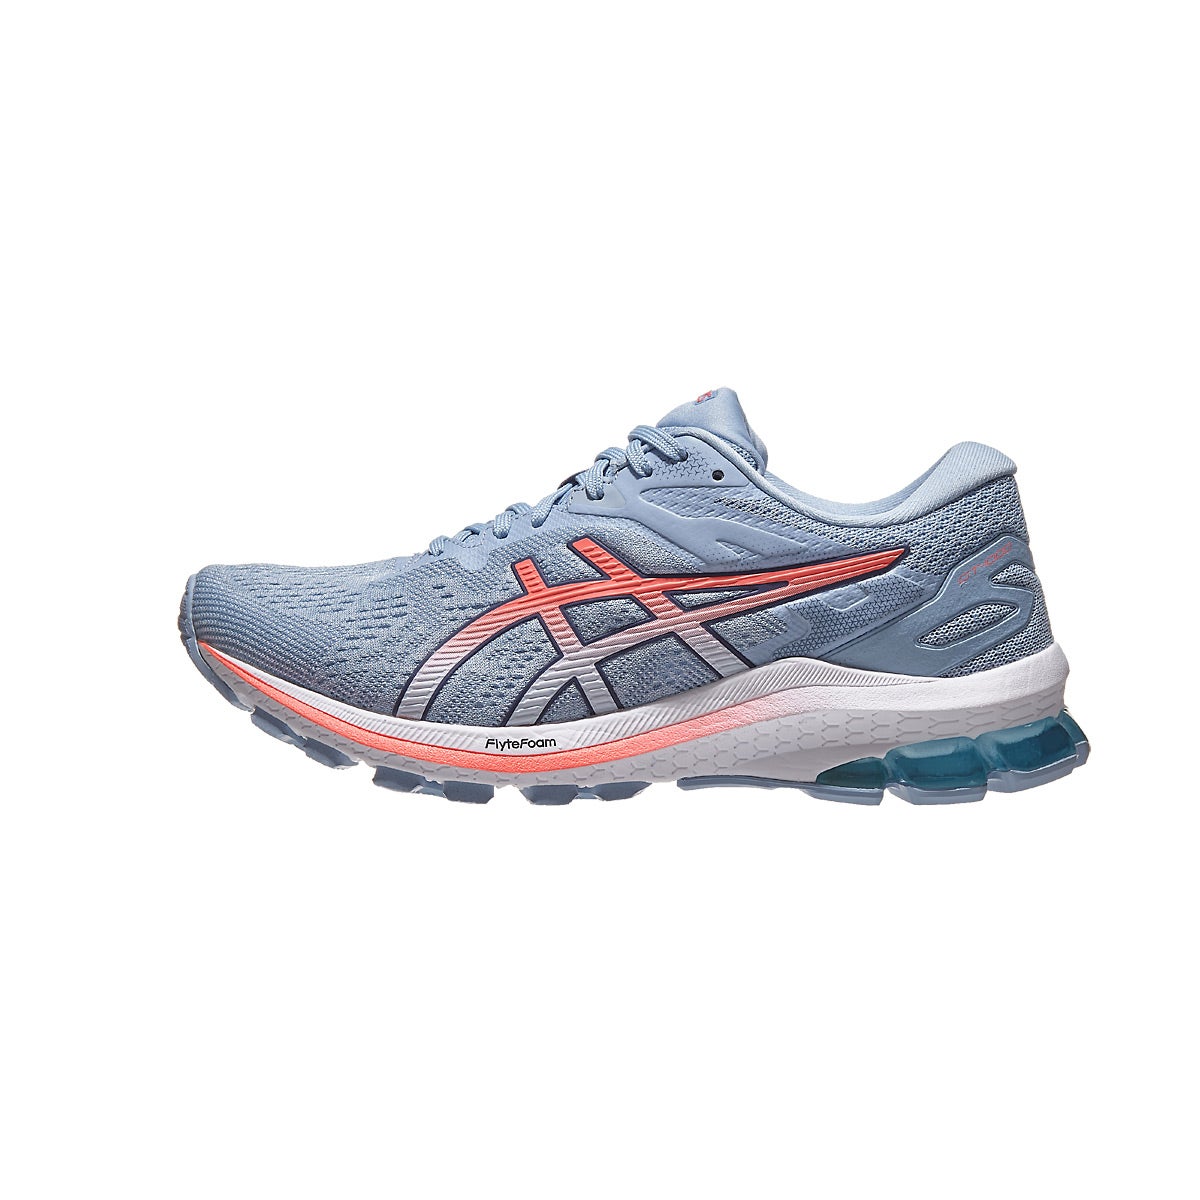 ASICS GT 1000 10 Women's Shoes Soft Sky/Blazing Coral 360° View ...